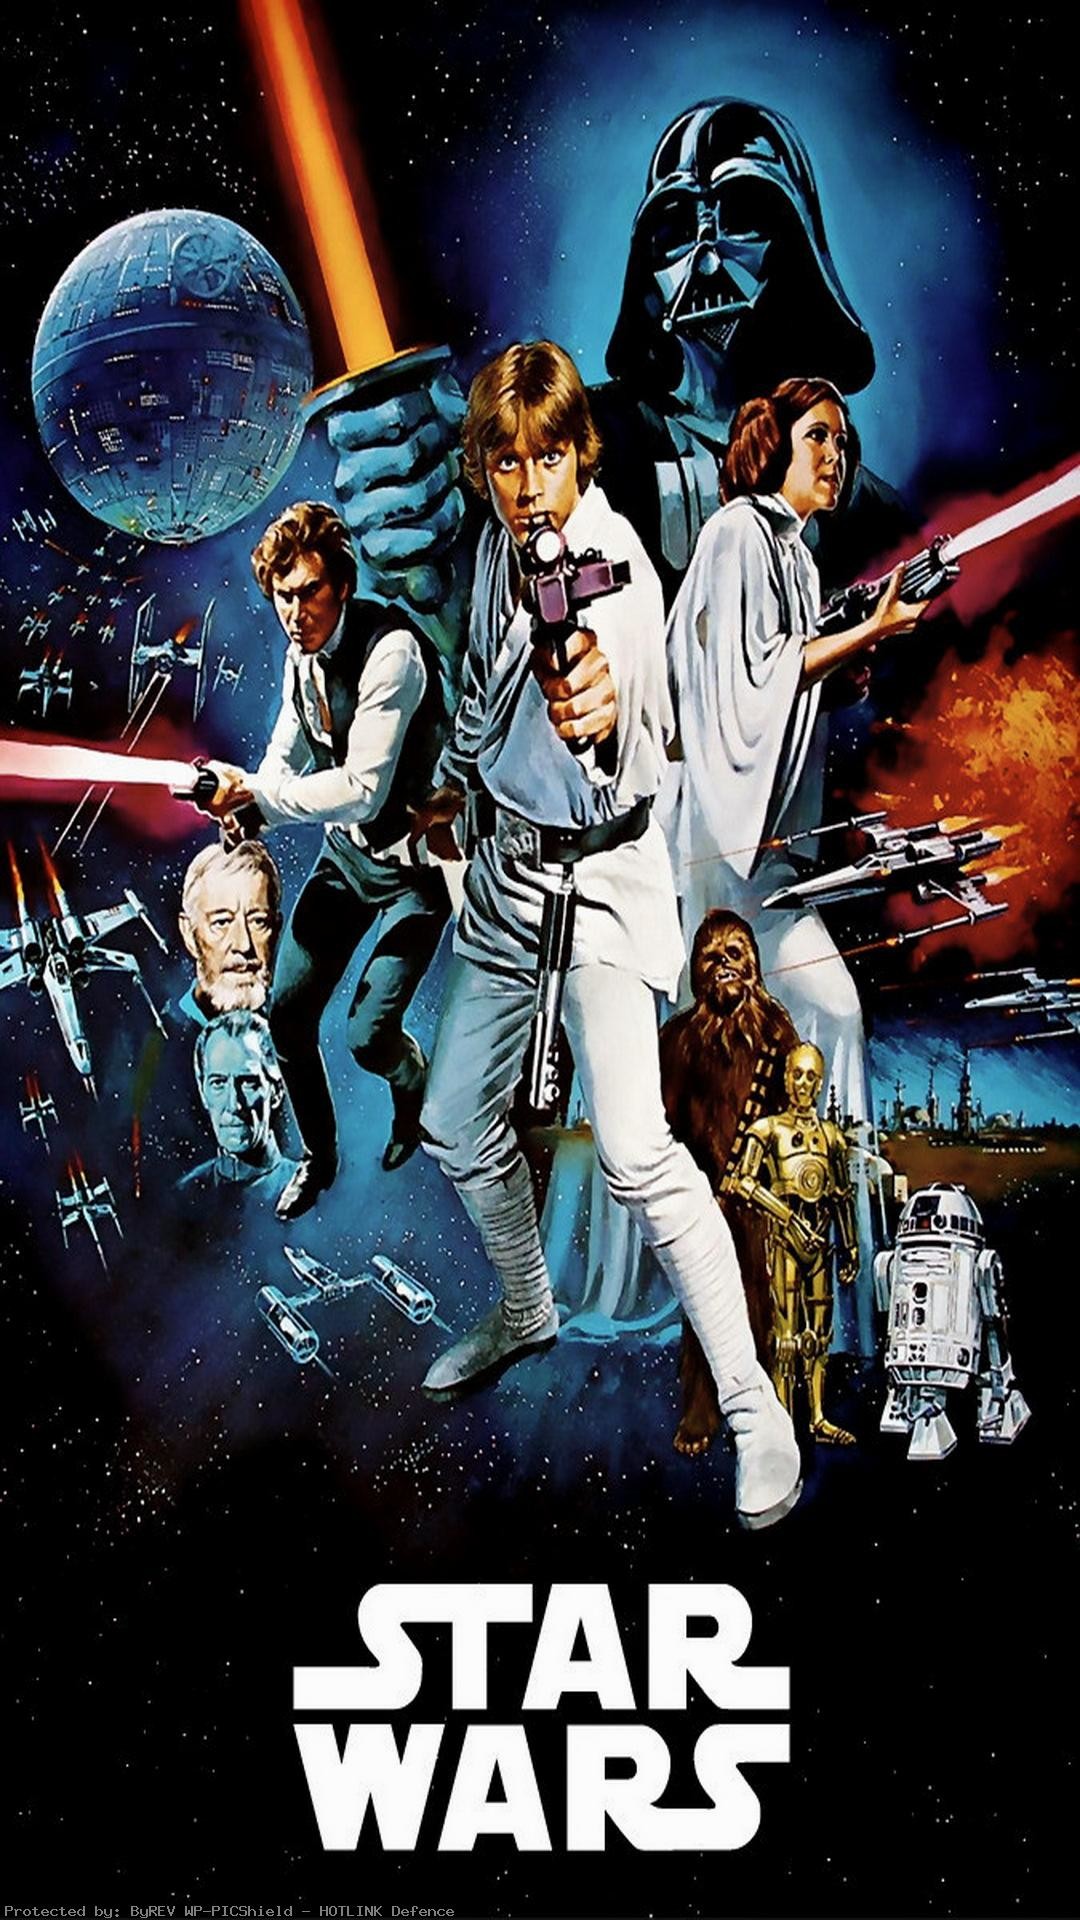 Star Wars Live Wallpaper Android (70+ images)